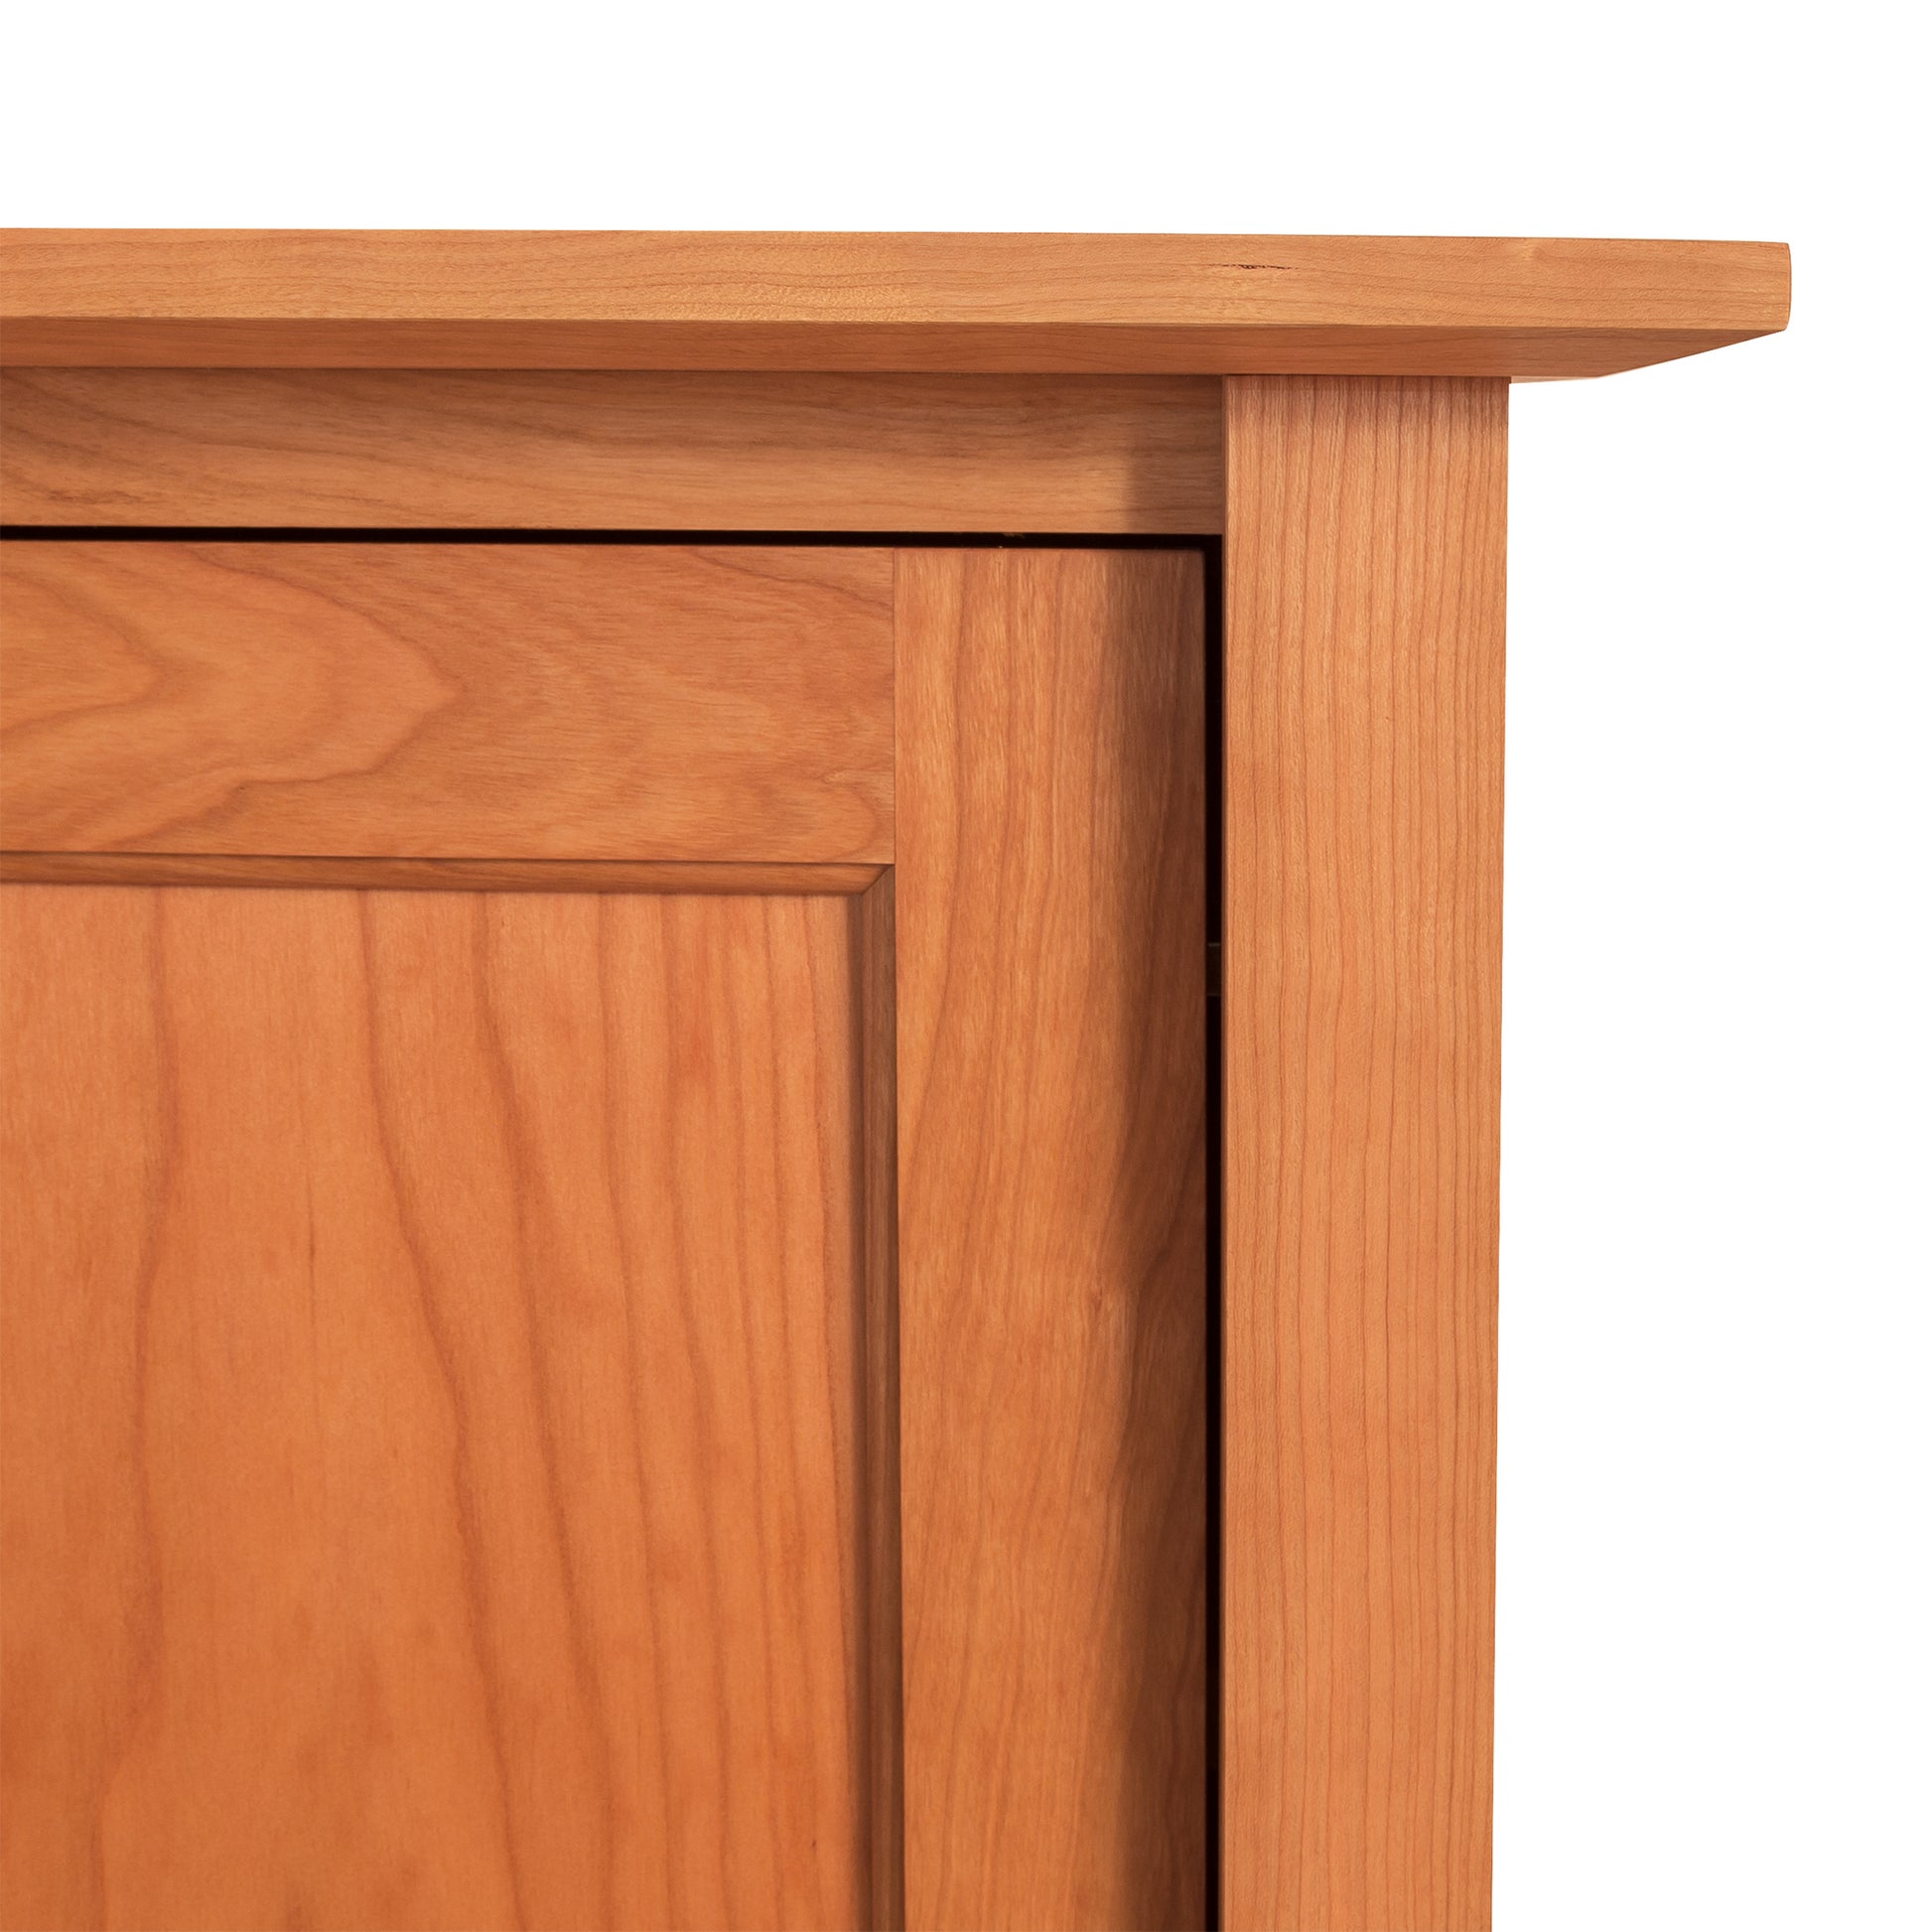 Close-up of an American Shaker Huntboard by Maple Corner Woodworks showing a detailed view of the door panel and frame with a smooth finish, emphasizing its craftsmanship and the natural cherry wood grain pattern.